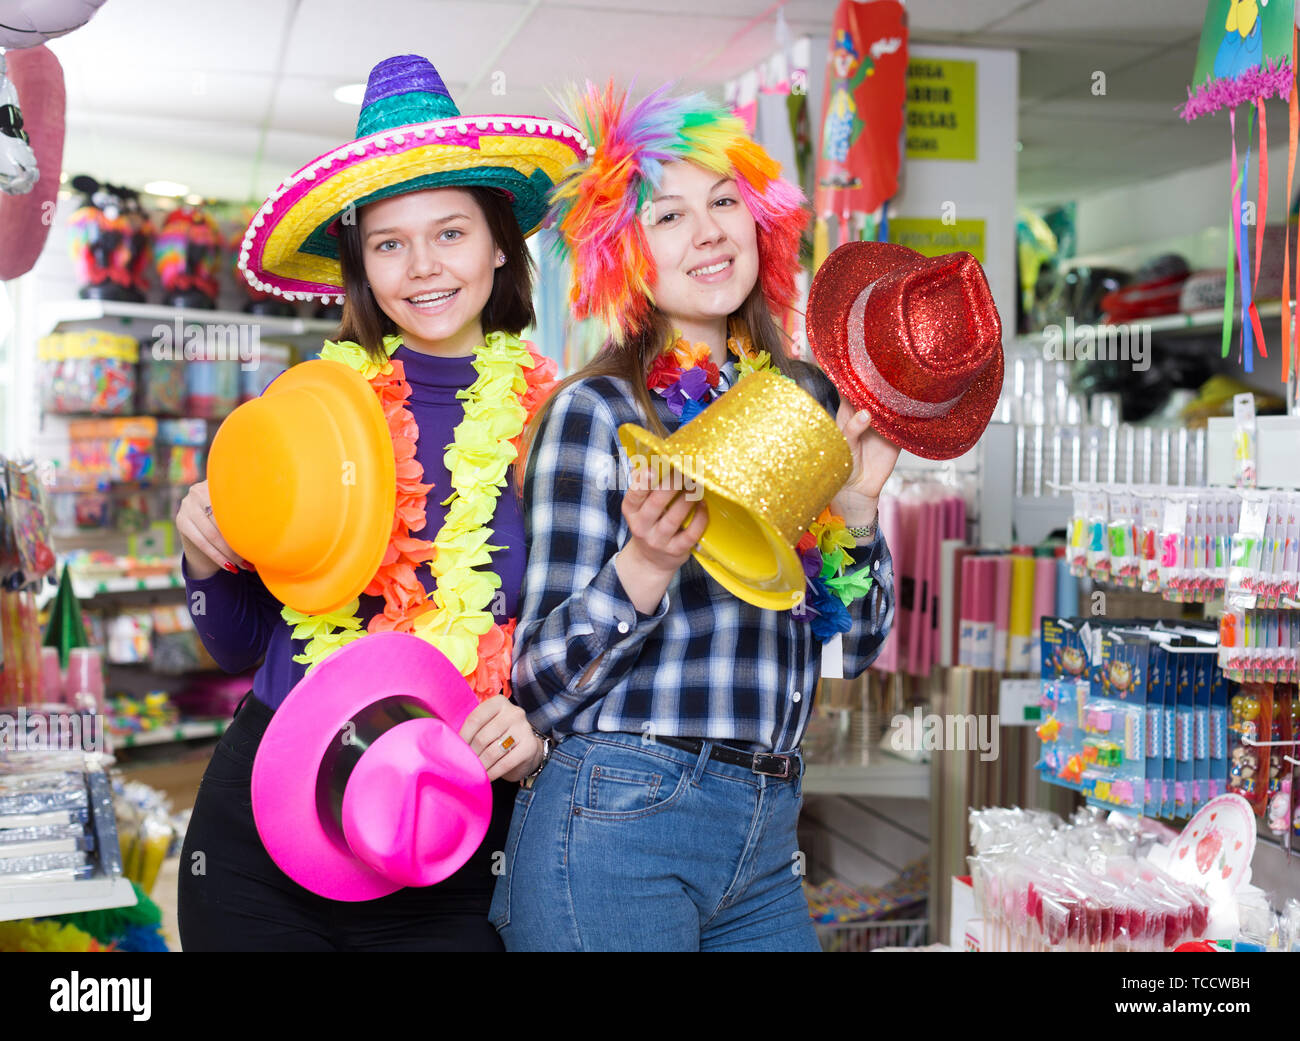 Smiling girls shopping together, looking for funny hats in store of festival  outfits and accessories Stock Photo - Alamy